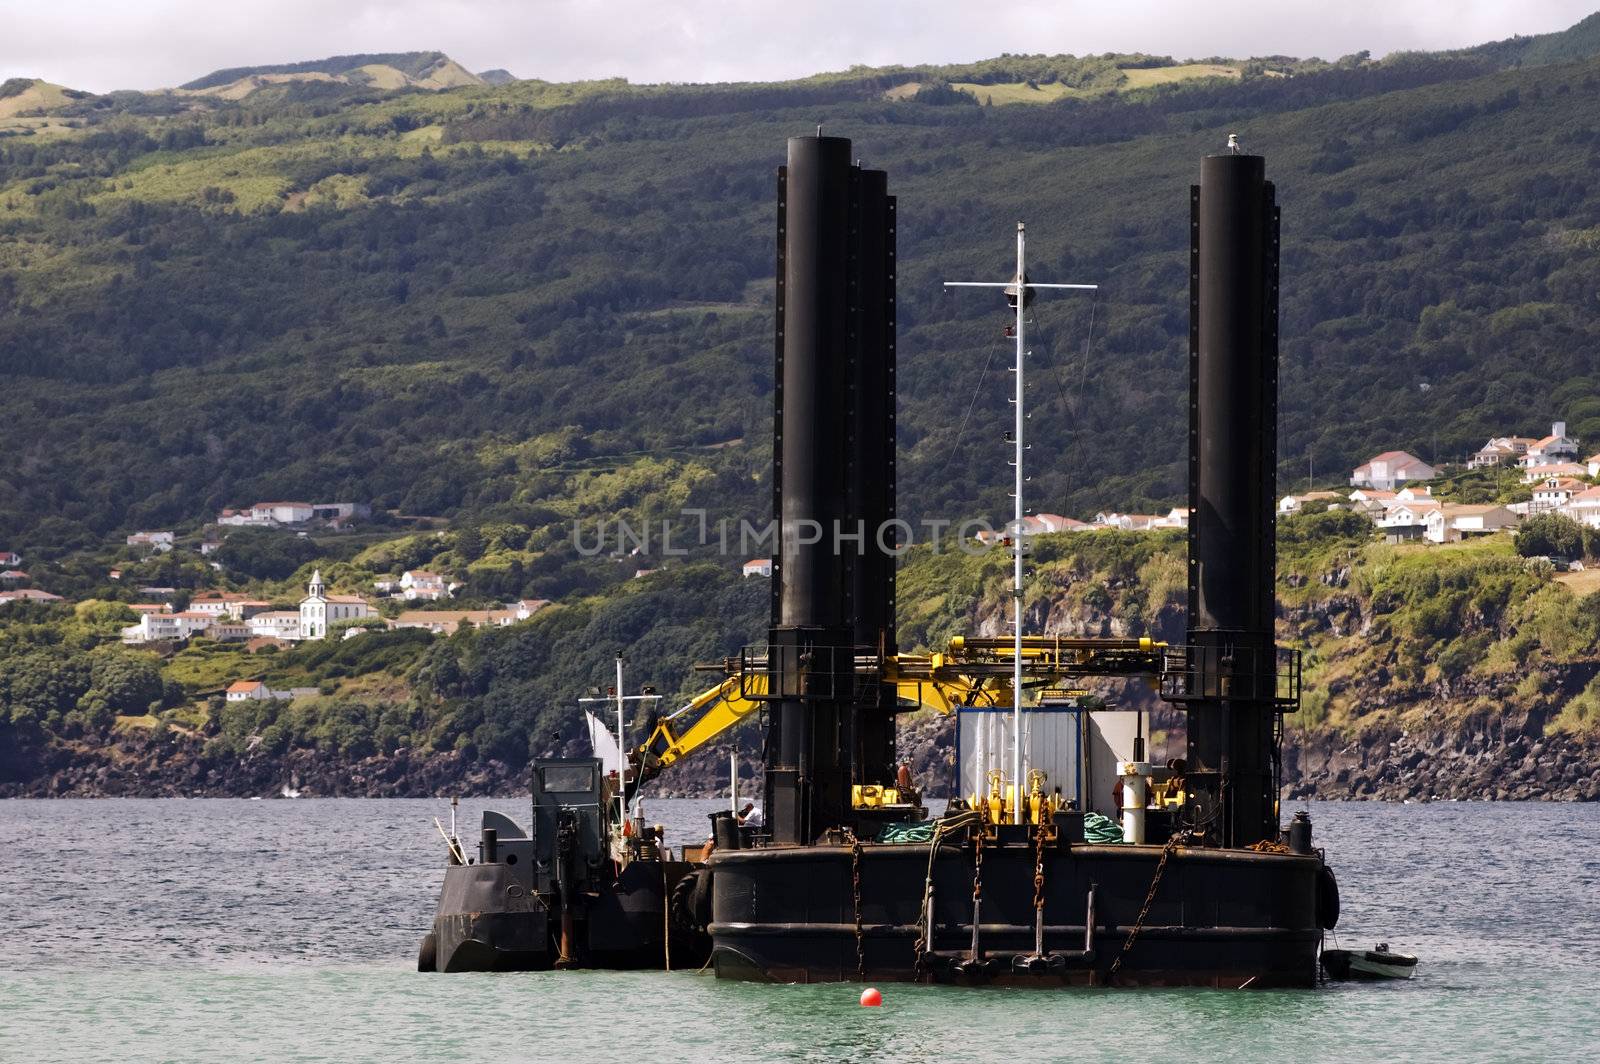 Dredger and barge by mrfotos